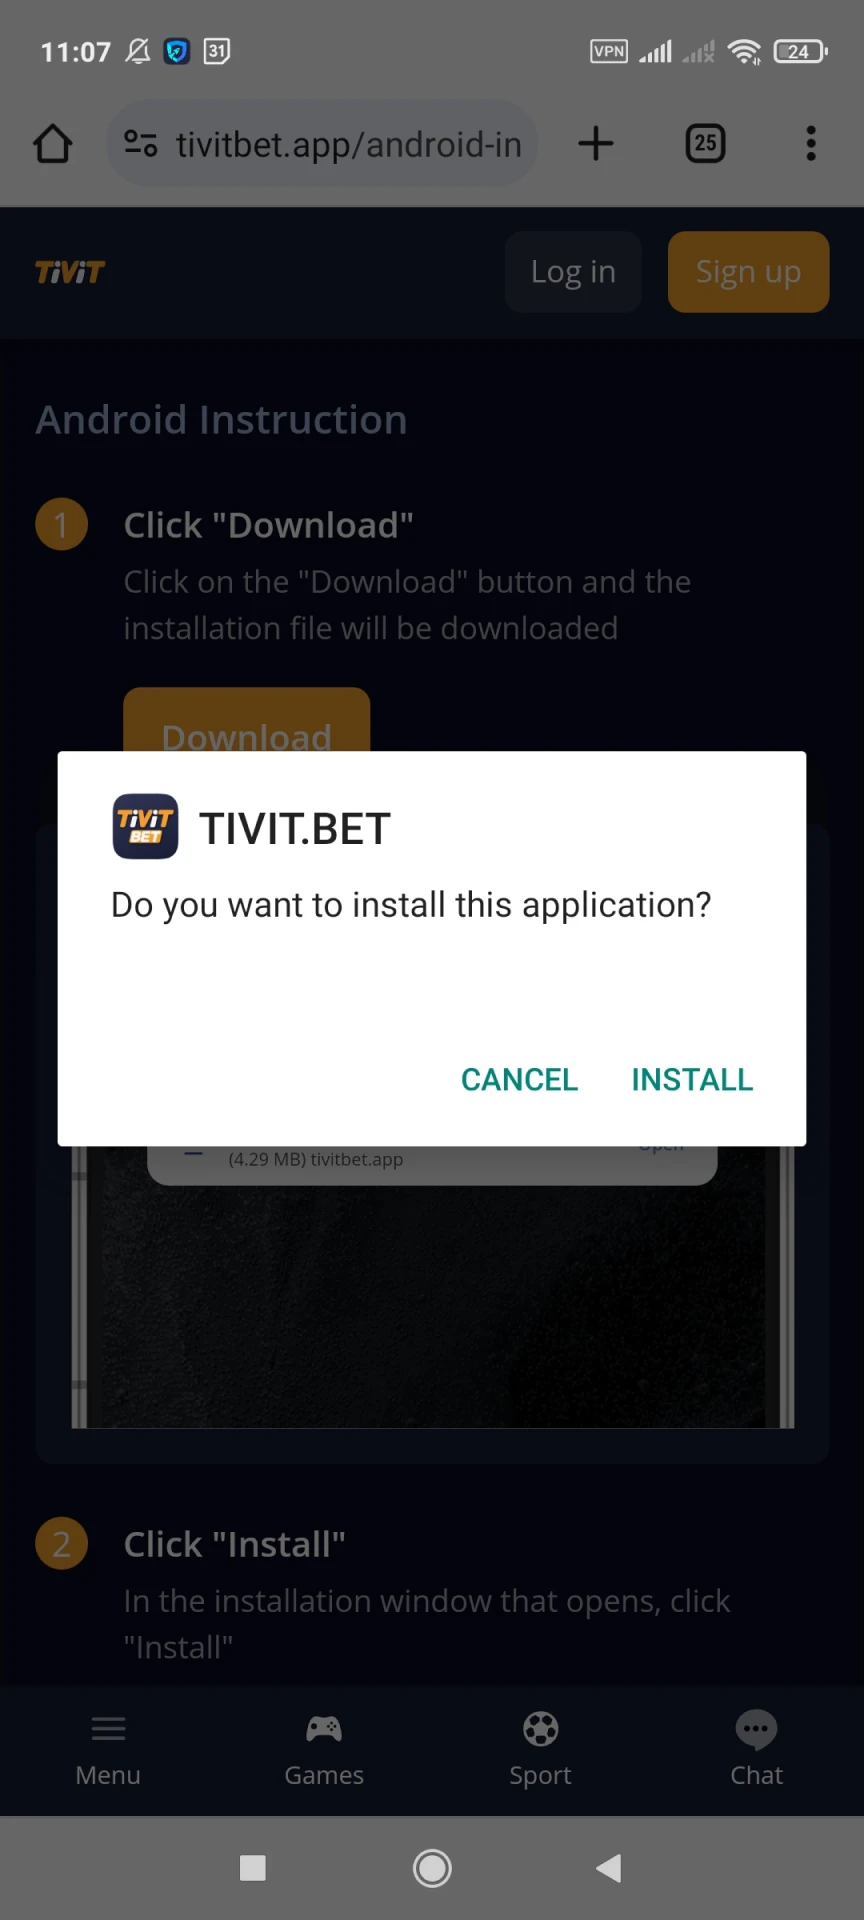 Click the install Tivitbet button to install the application.